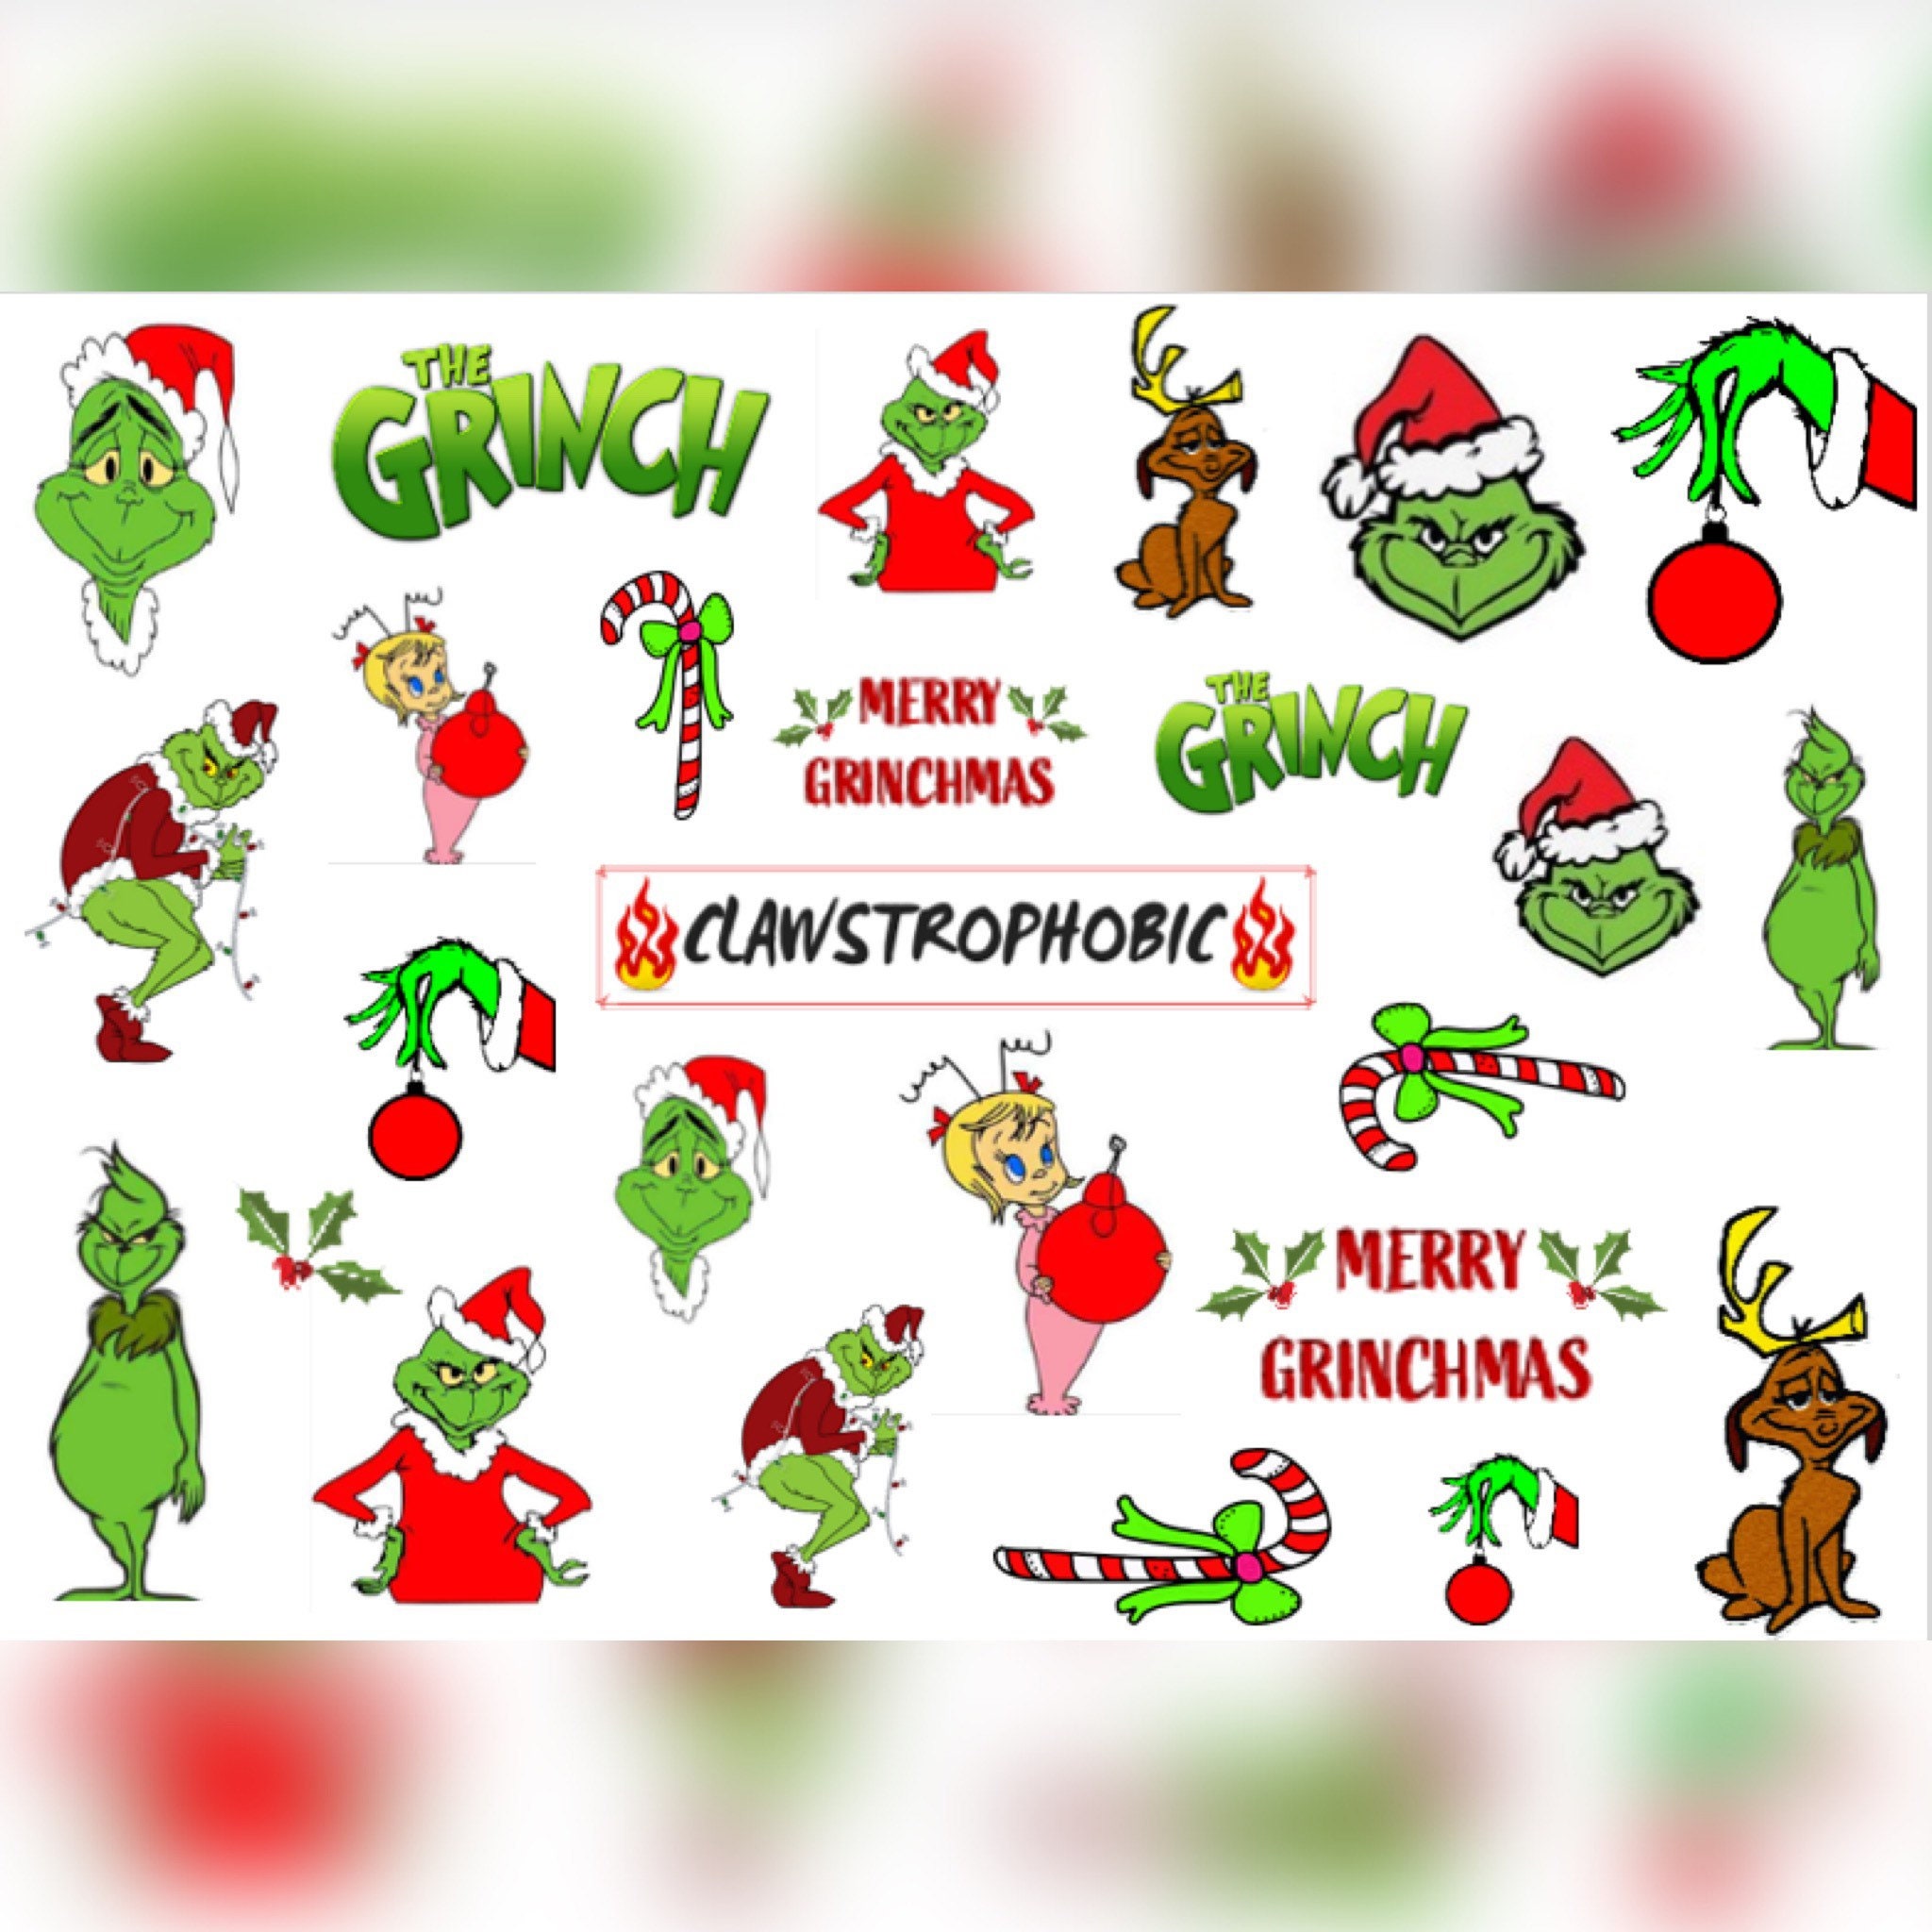 The Grinch Who Stole Christmas - Nail Art - Moon Sugar Decals